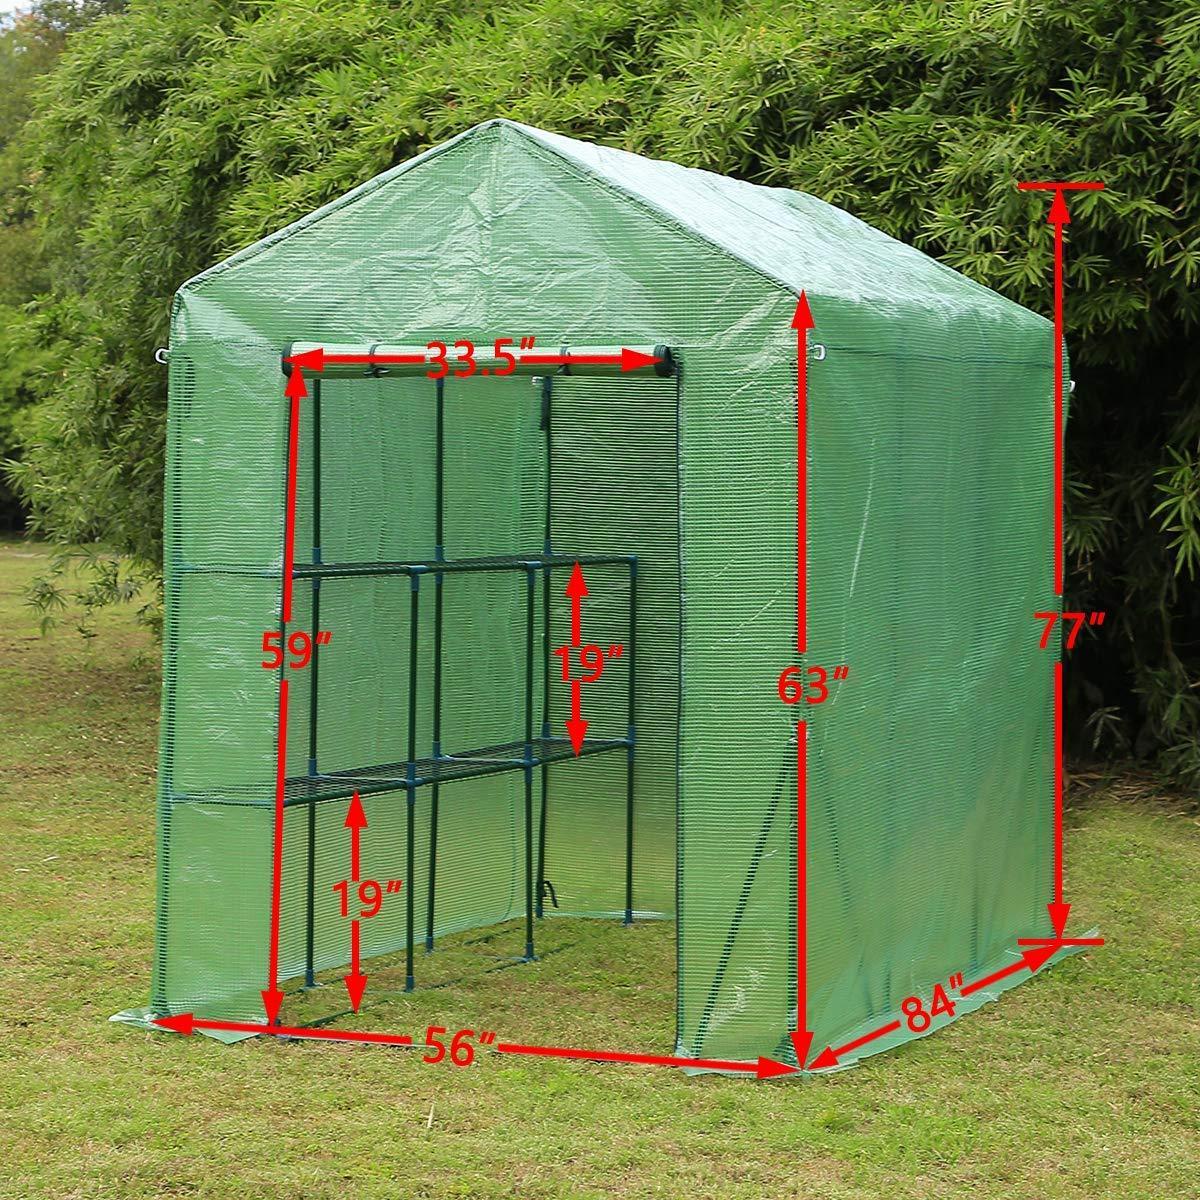 4.6&#039;x7&#039;x6.4&#039; Portable Walk-in Greenhouses with 2 Tier 6 Shelves, Green